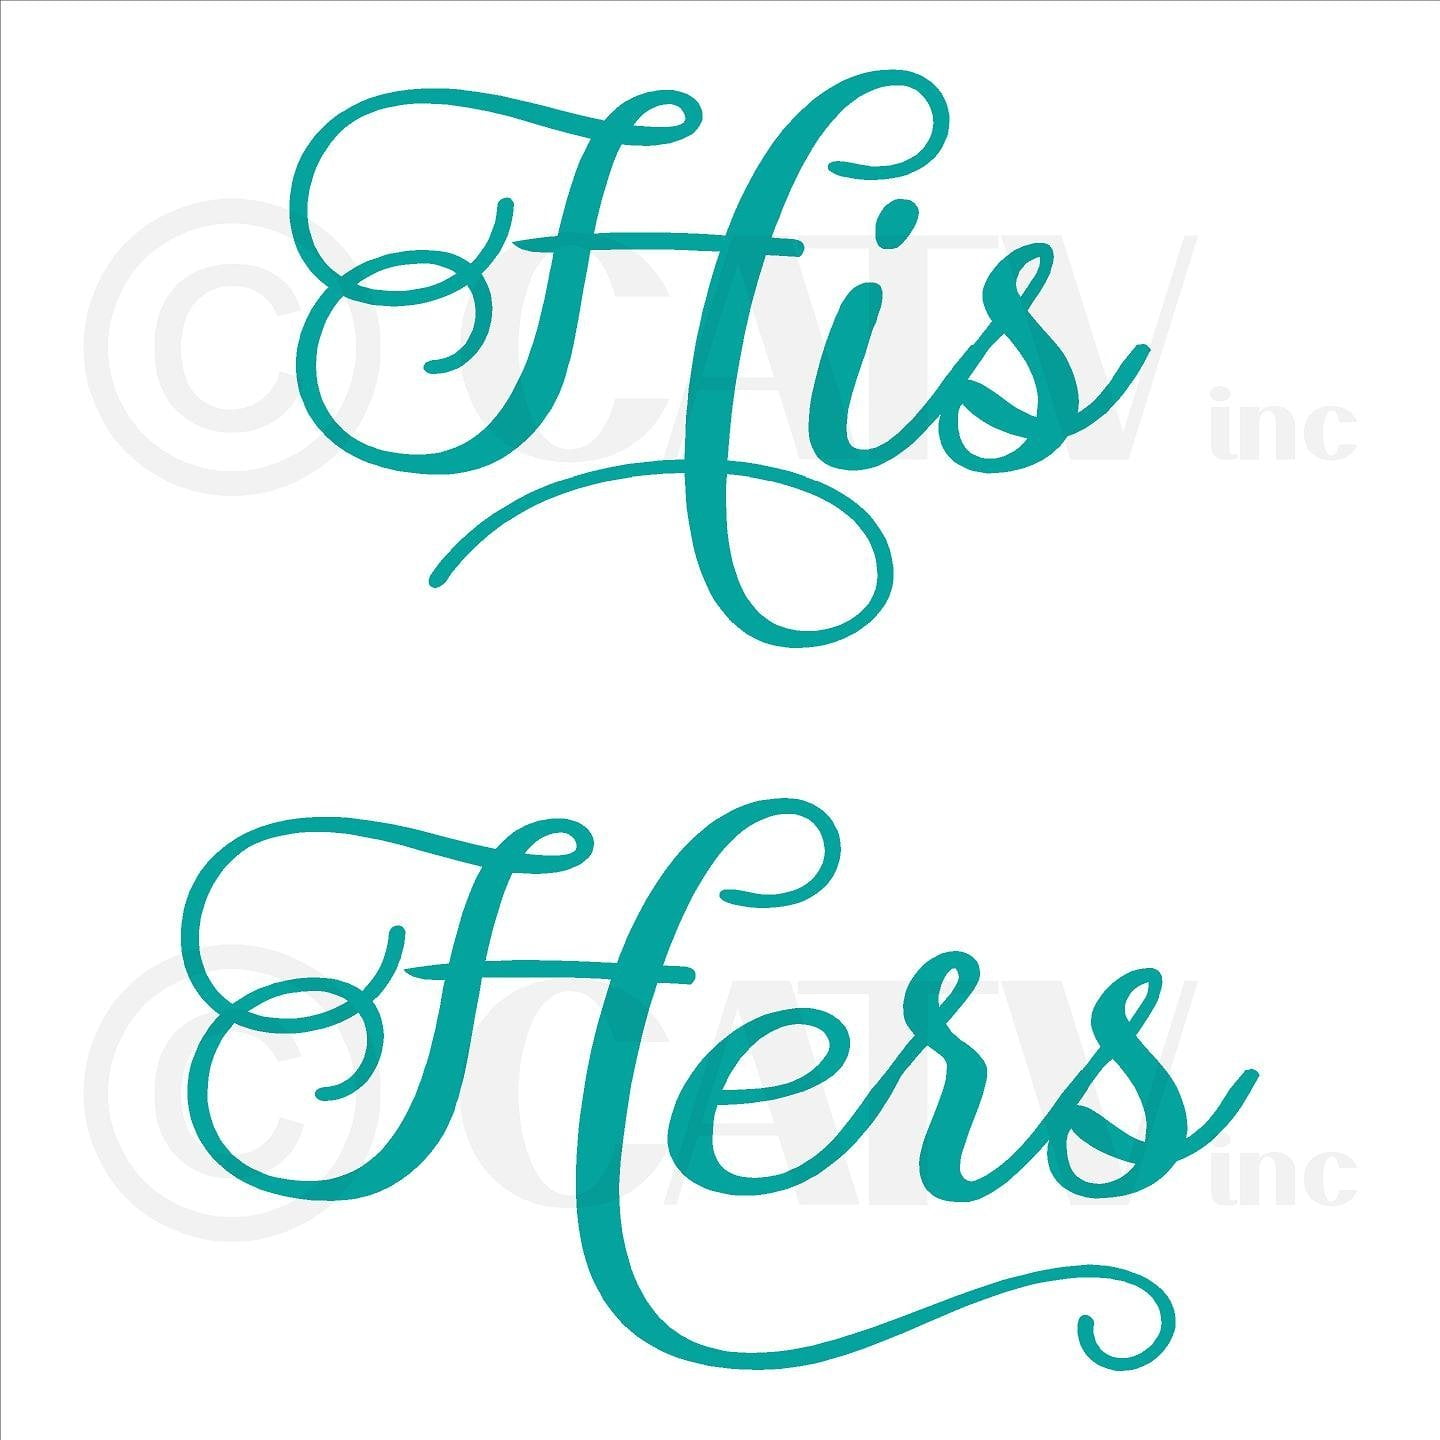 His and Hers Vinyl Lettering Wall Decal Sticker Bathroom Decals